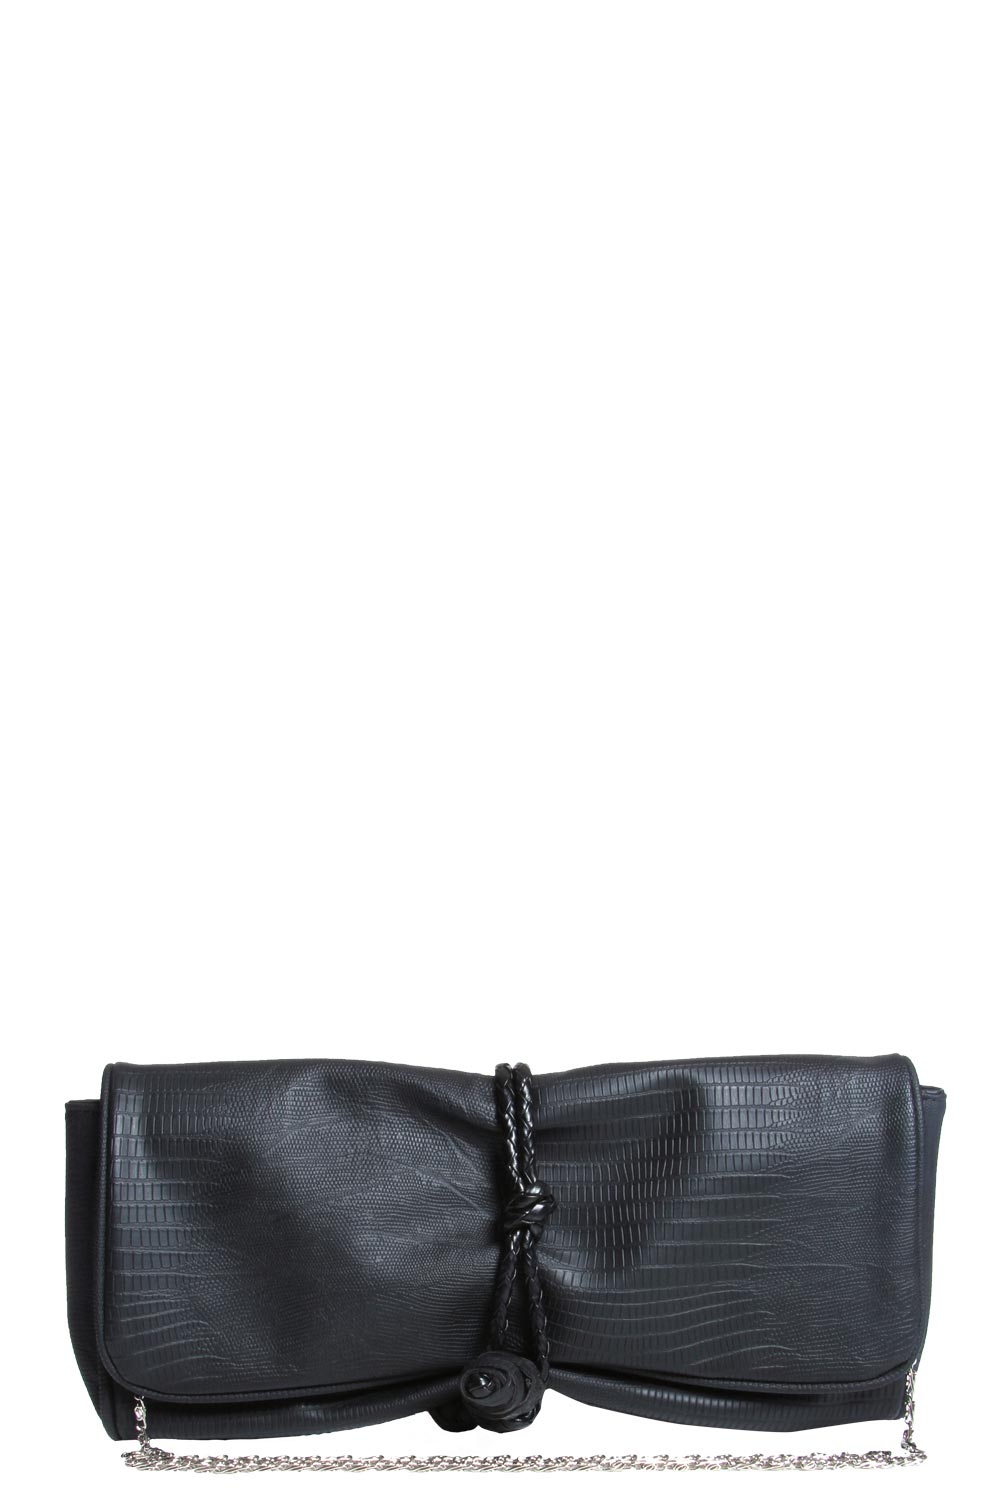 Shelly Scale Effect Rope Tie Clutch -